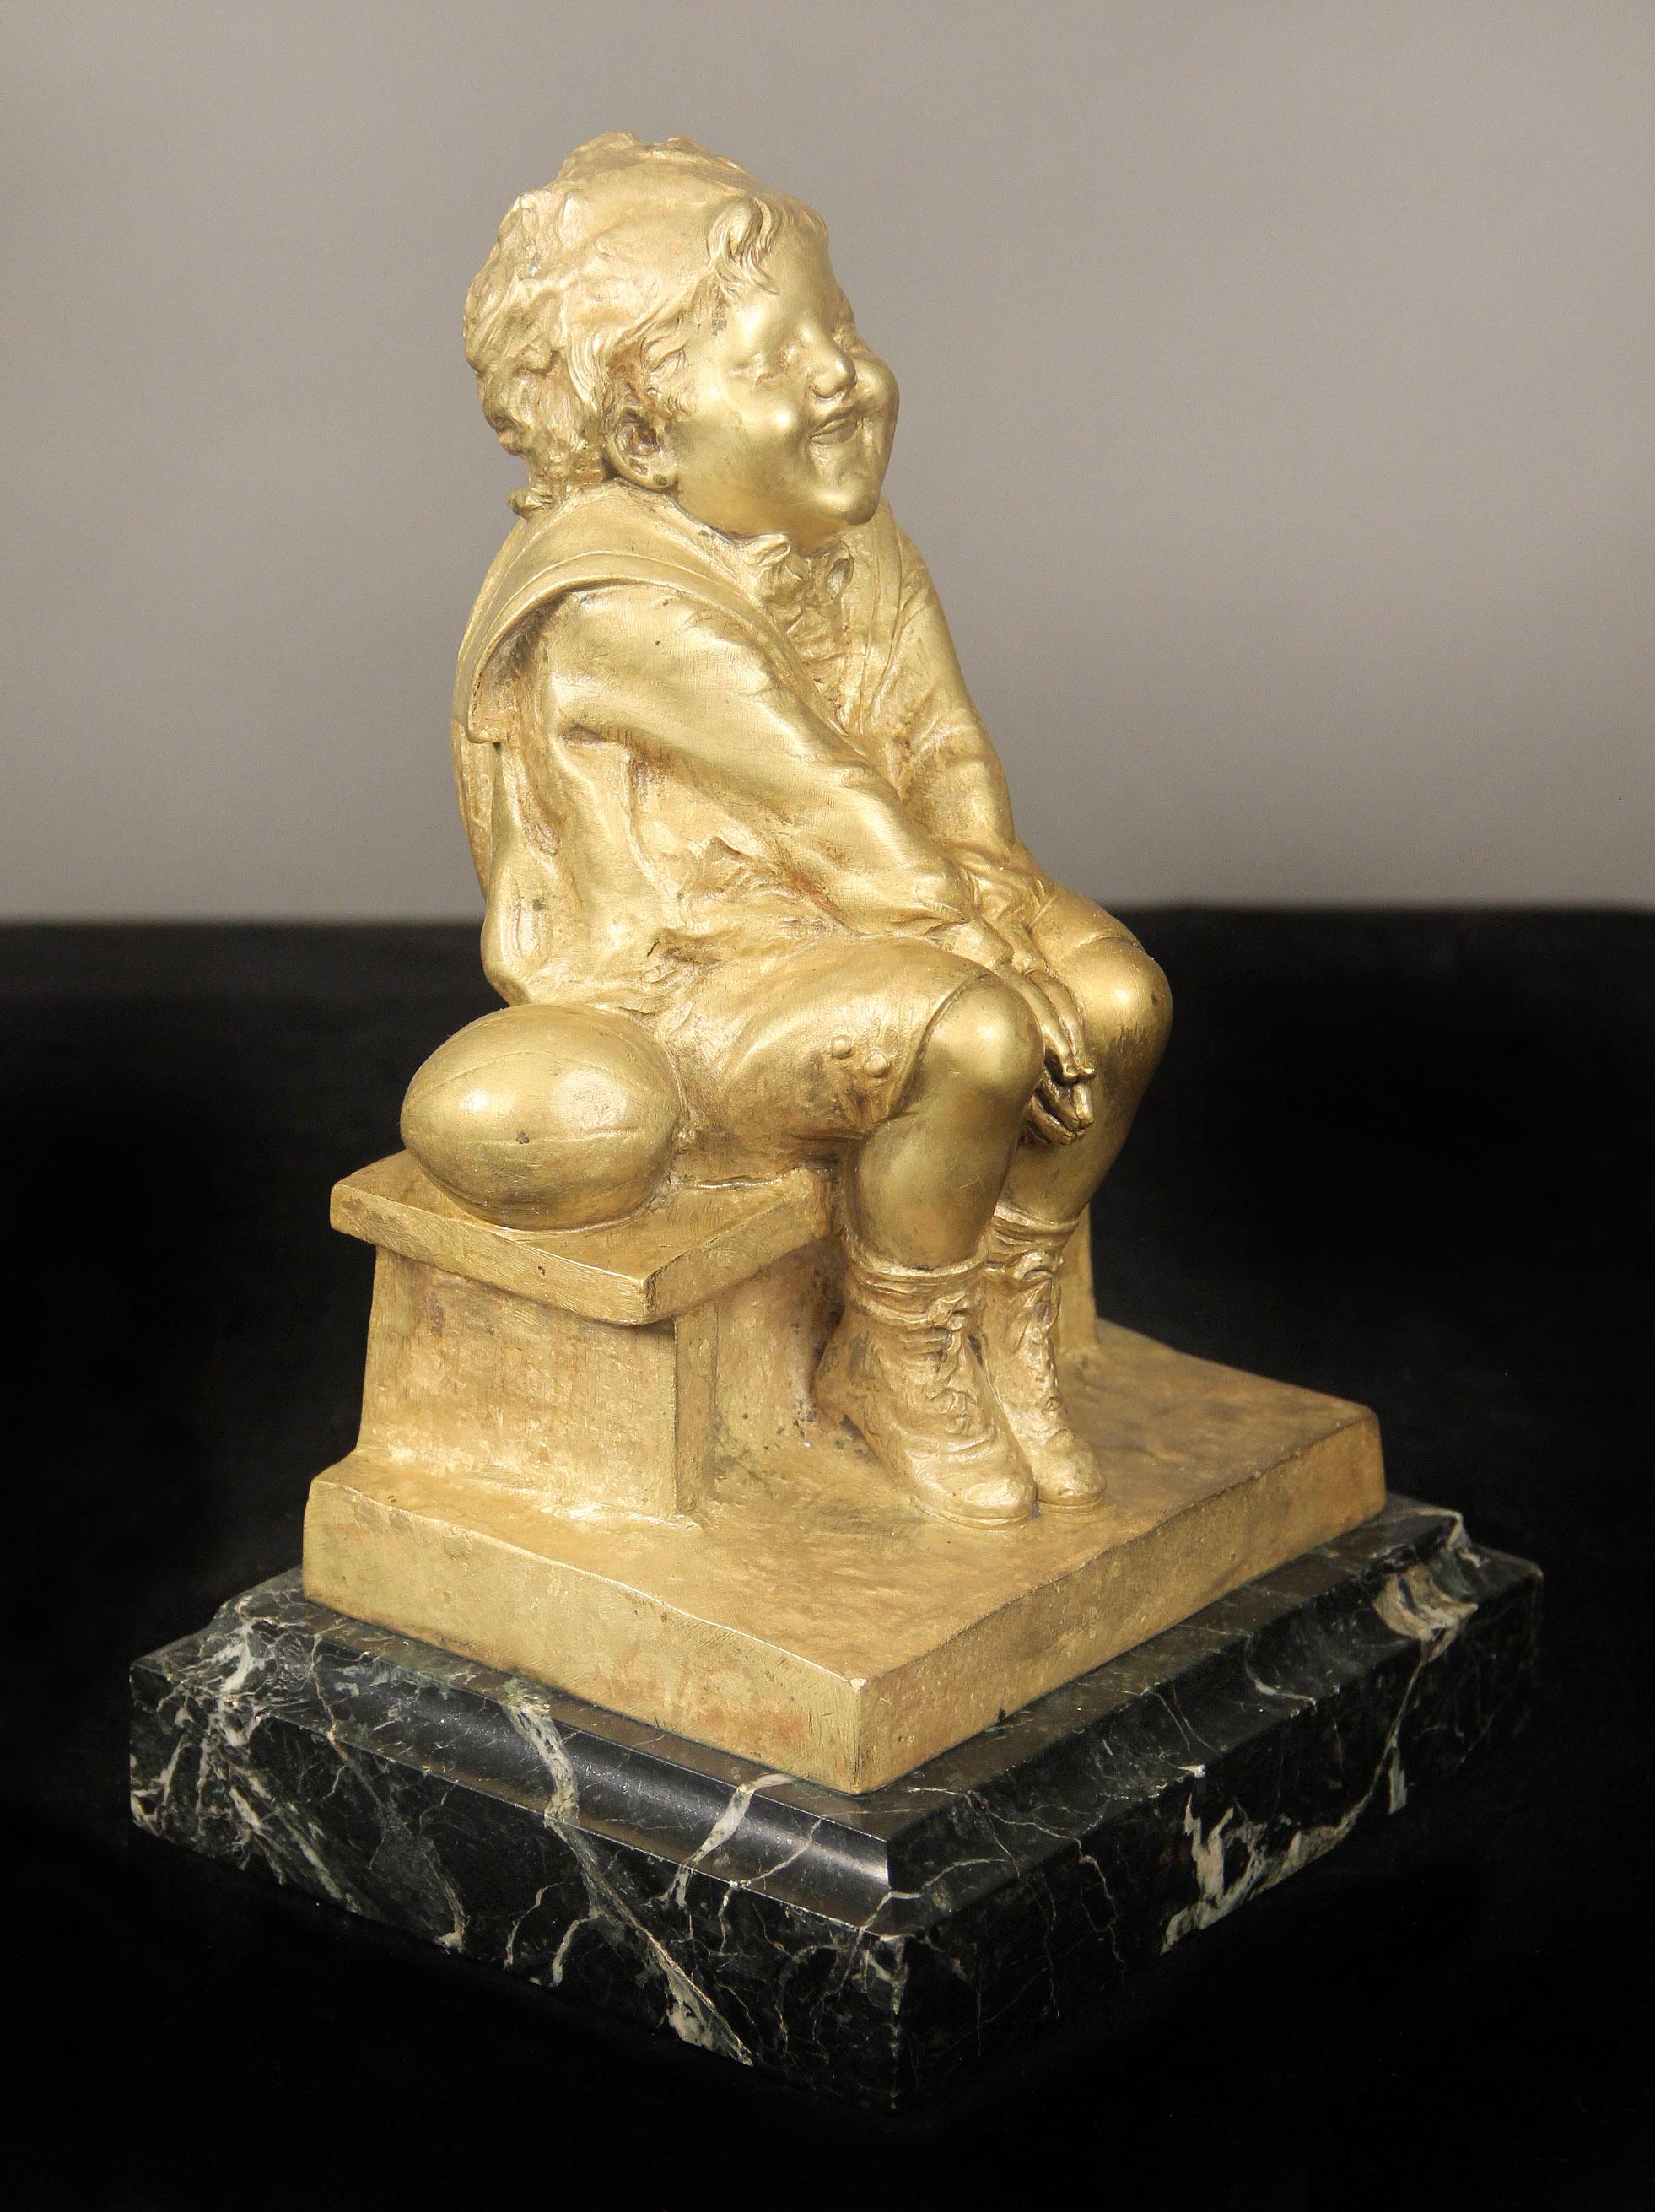 A nice early 20th century gilt bronze sculpture of a child seated on a marble base

By Juan Clara

Signed Juan Clara and stamped 39/1421 AH.

Juan Clara (1875-1958), born in Olot near Girona, is a Spanish sculptor who is famous for mainly